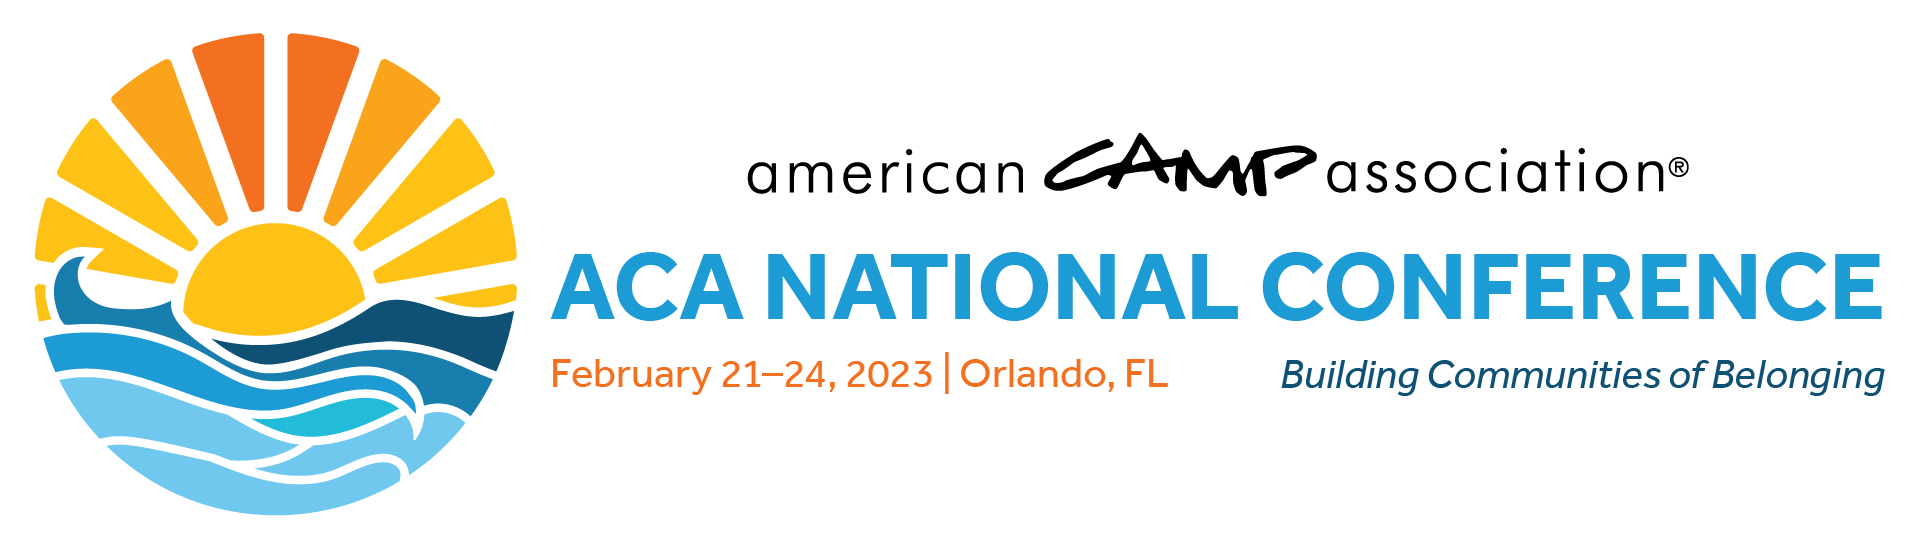 2023 ACA National Conference American Camp Association